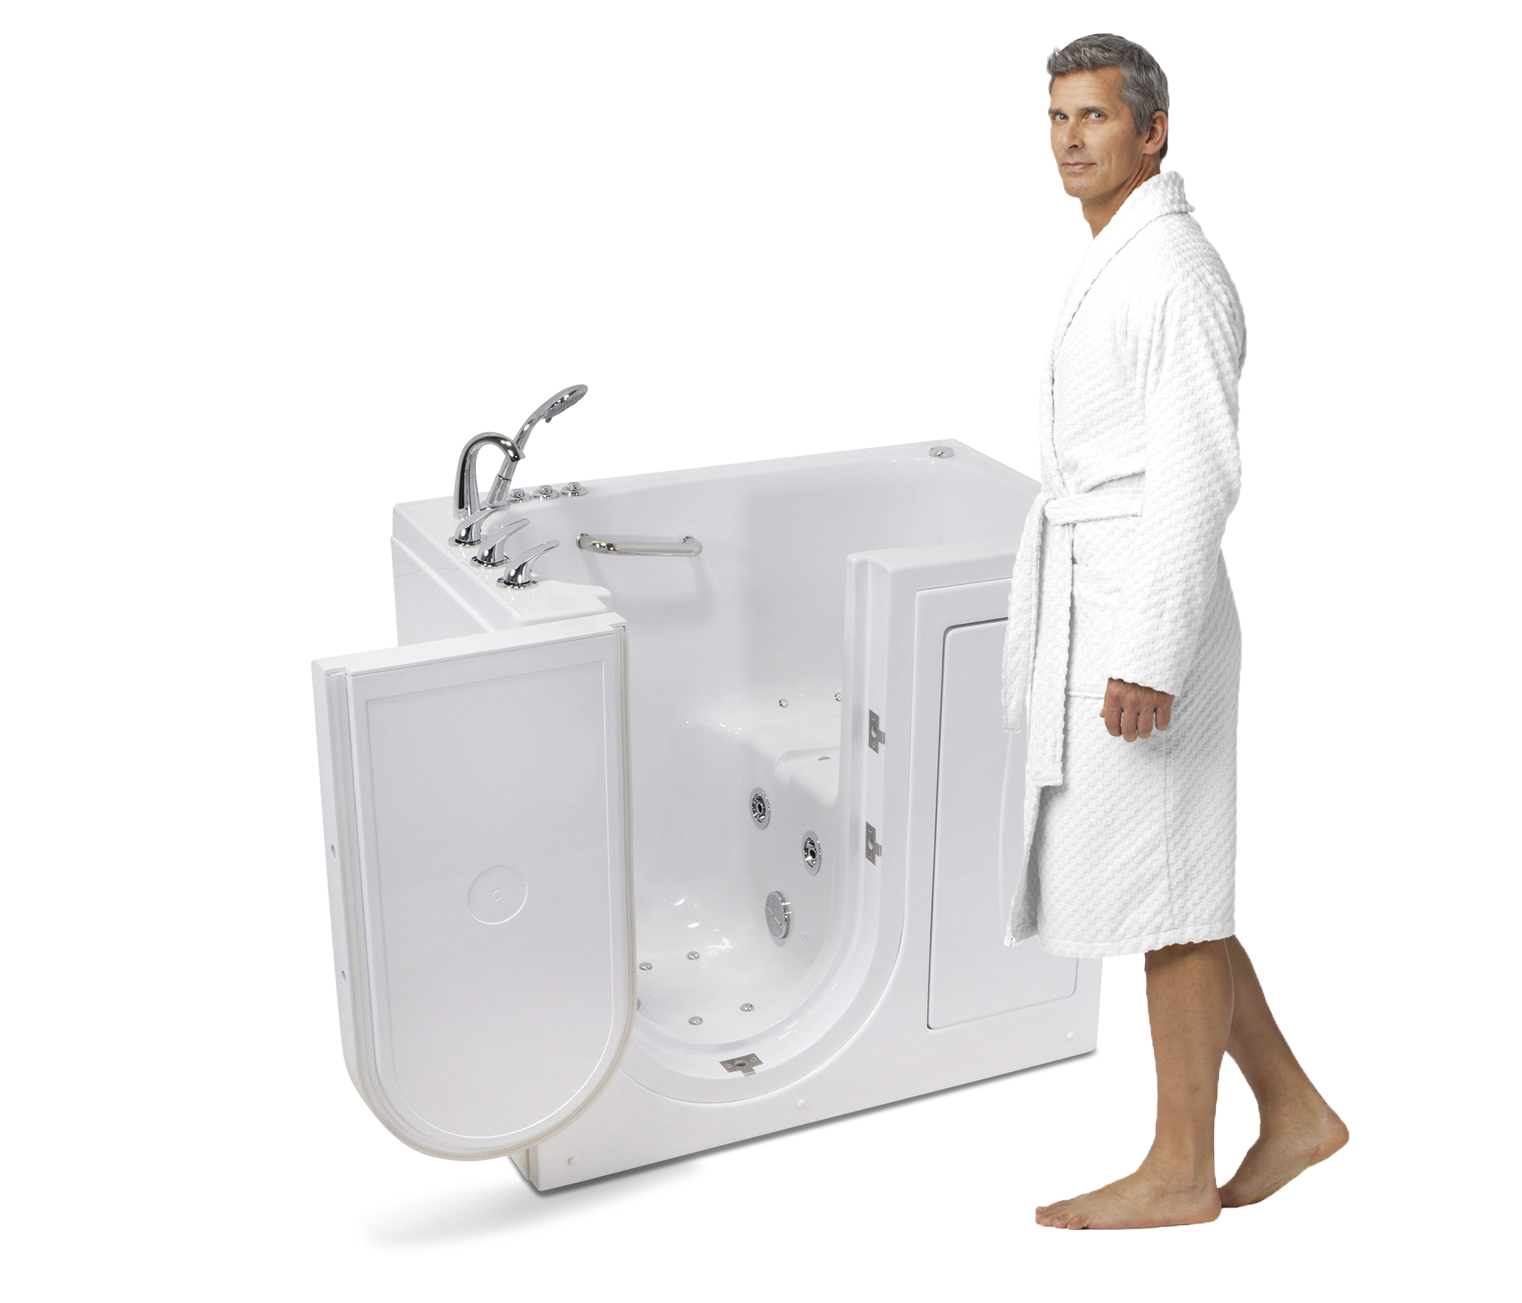 How does a walk-in tub work?